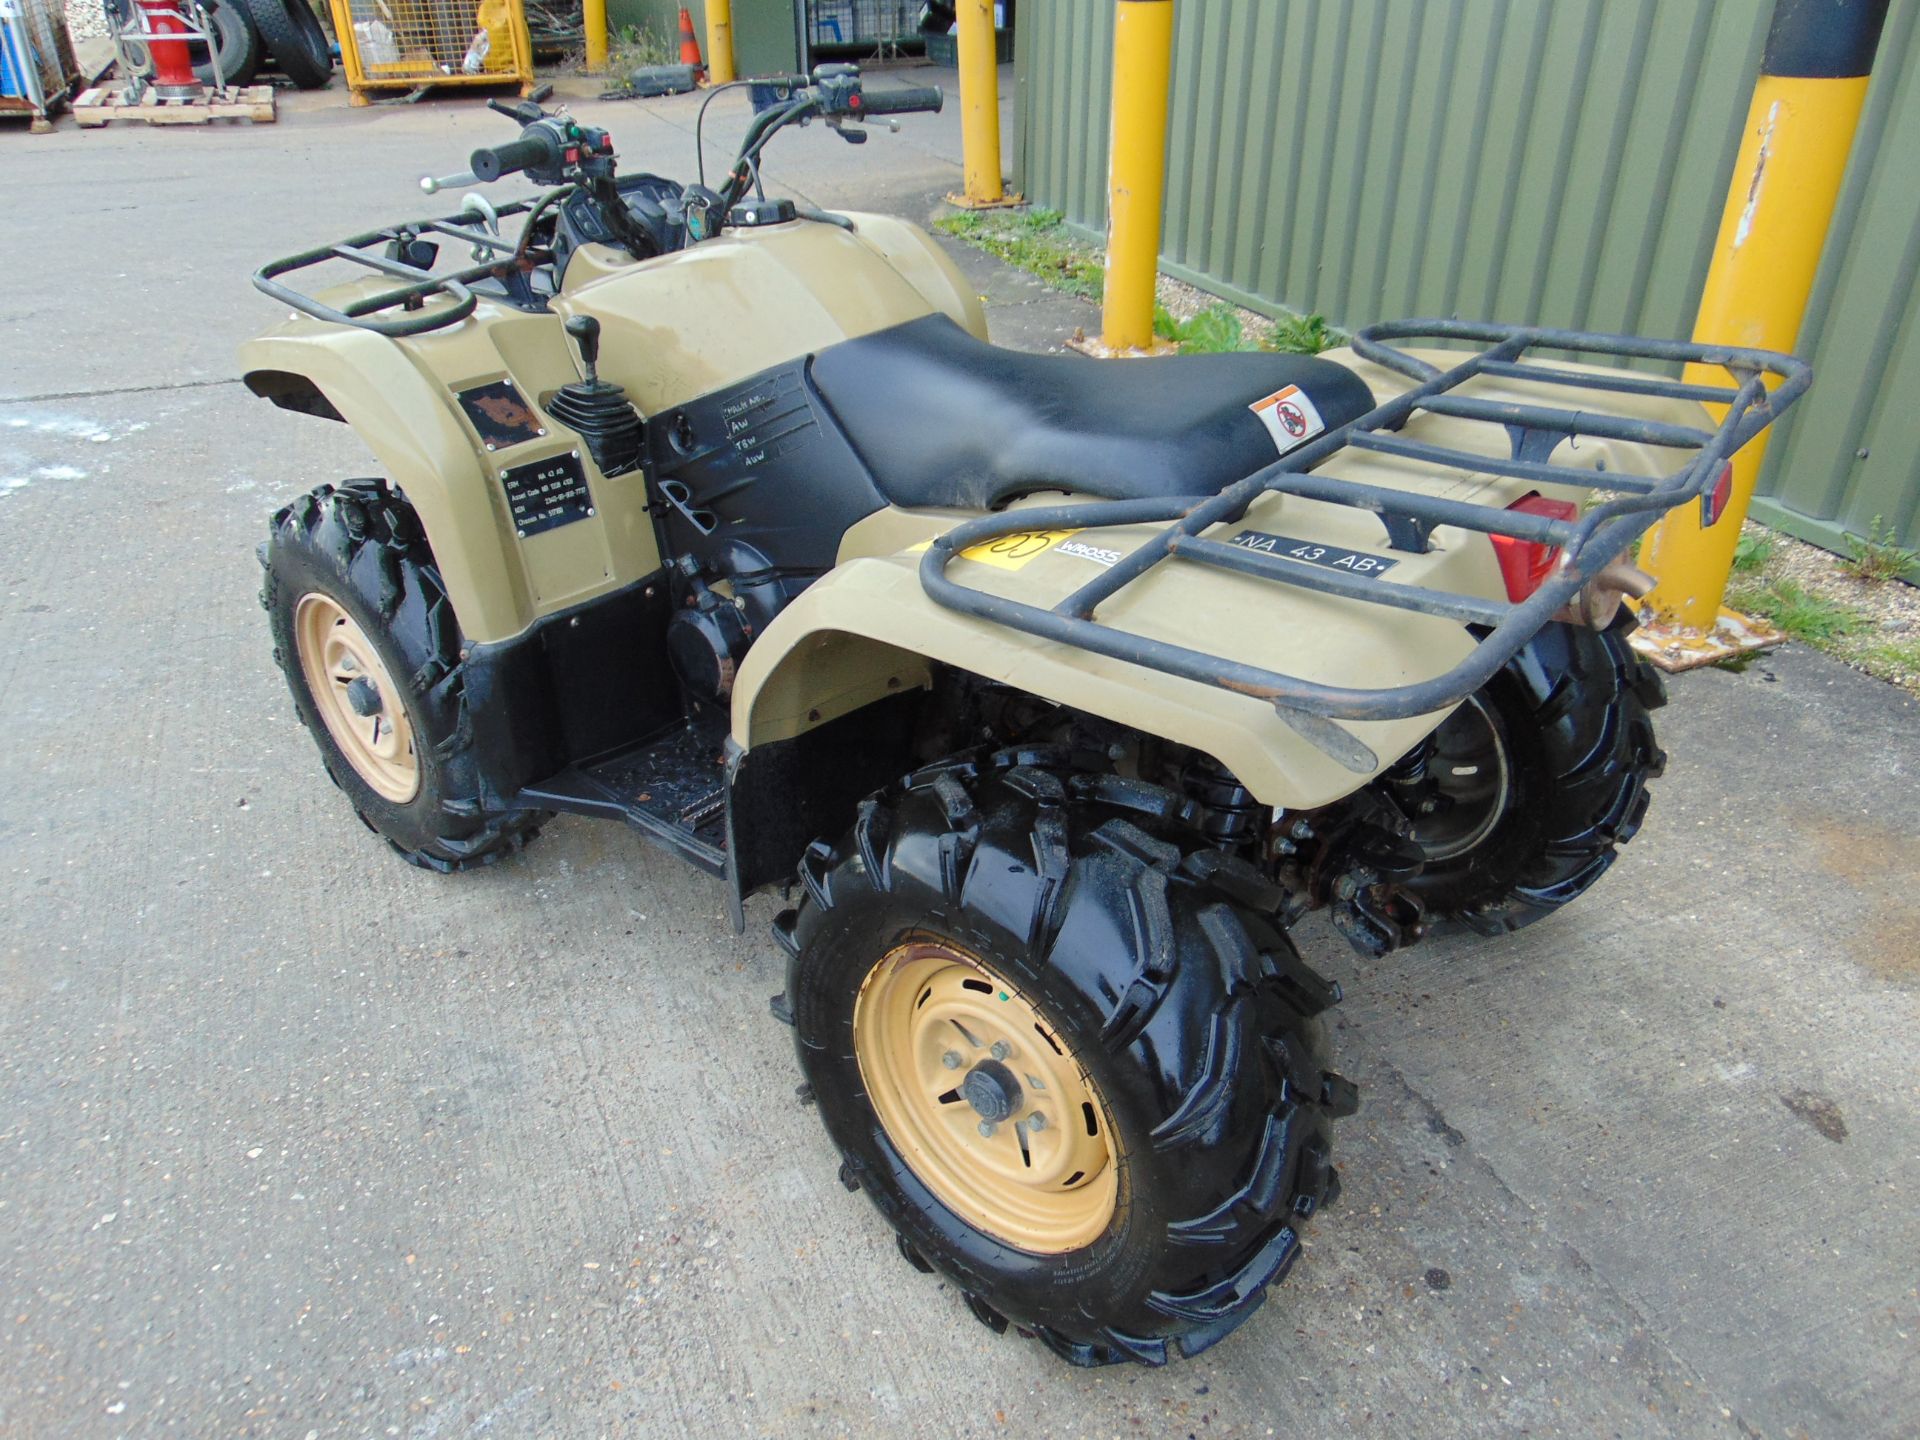 Recent Release Military Specification Yamaha Grizzly 450 4 x 4 ATV Quad Bike - Image 5 of 15